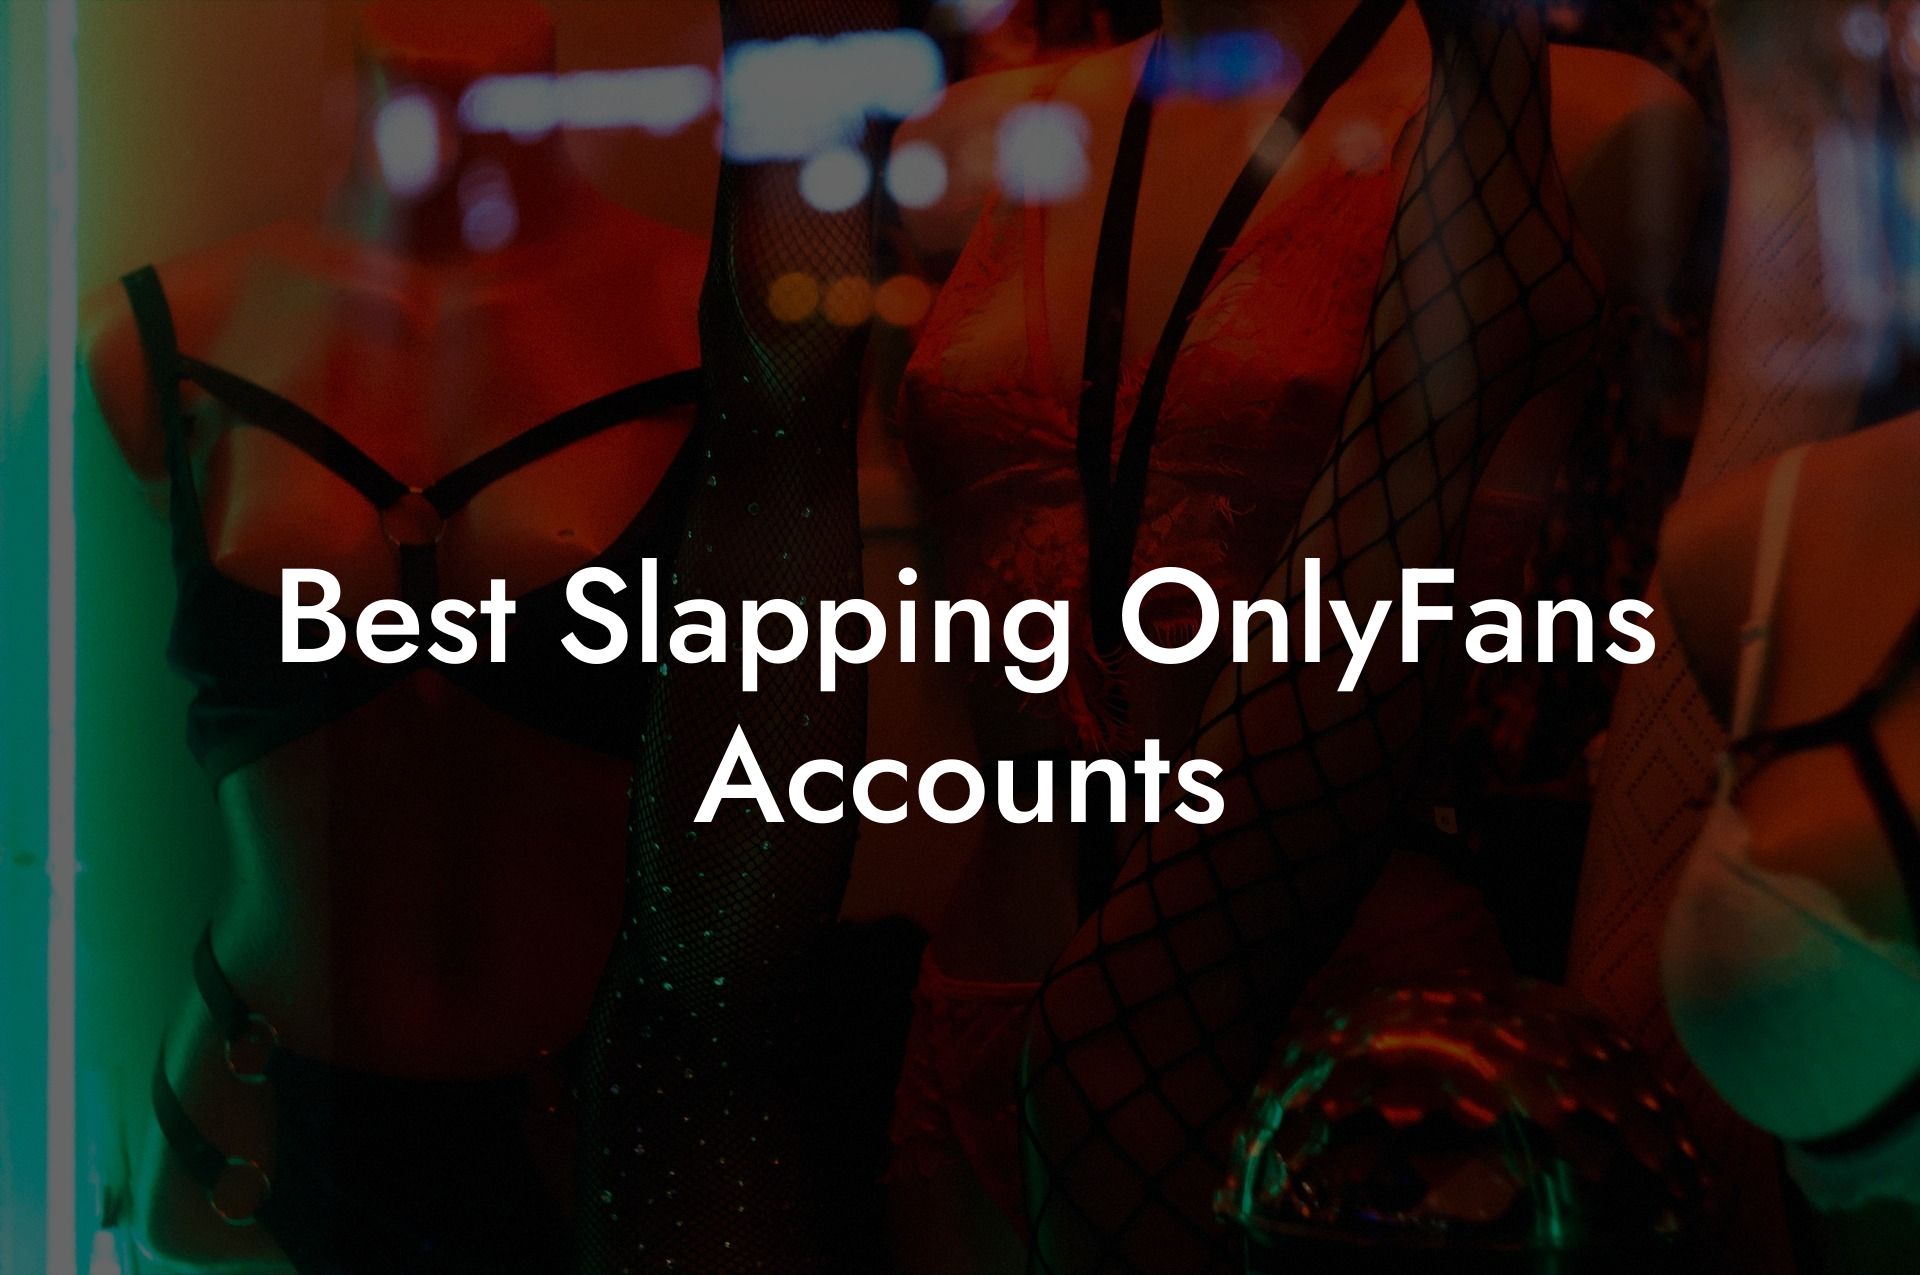 Best Slapping OnlyFans Accounts